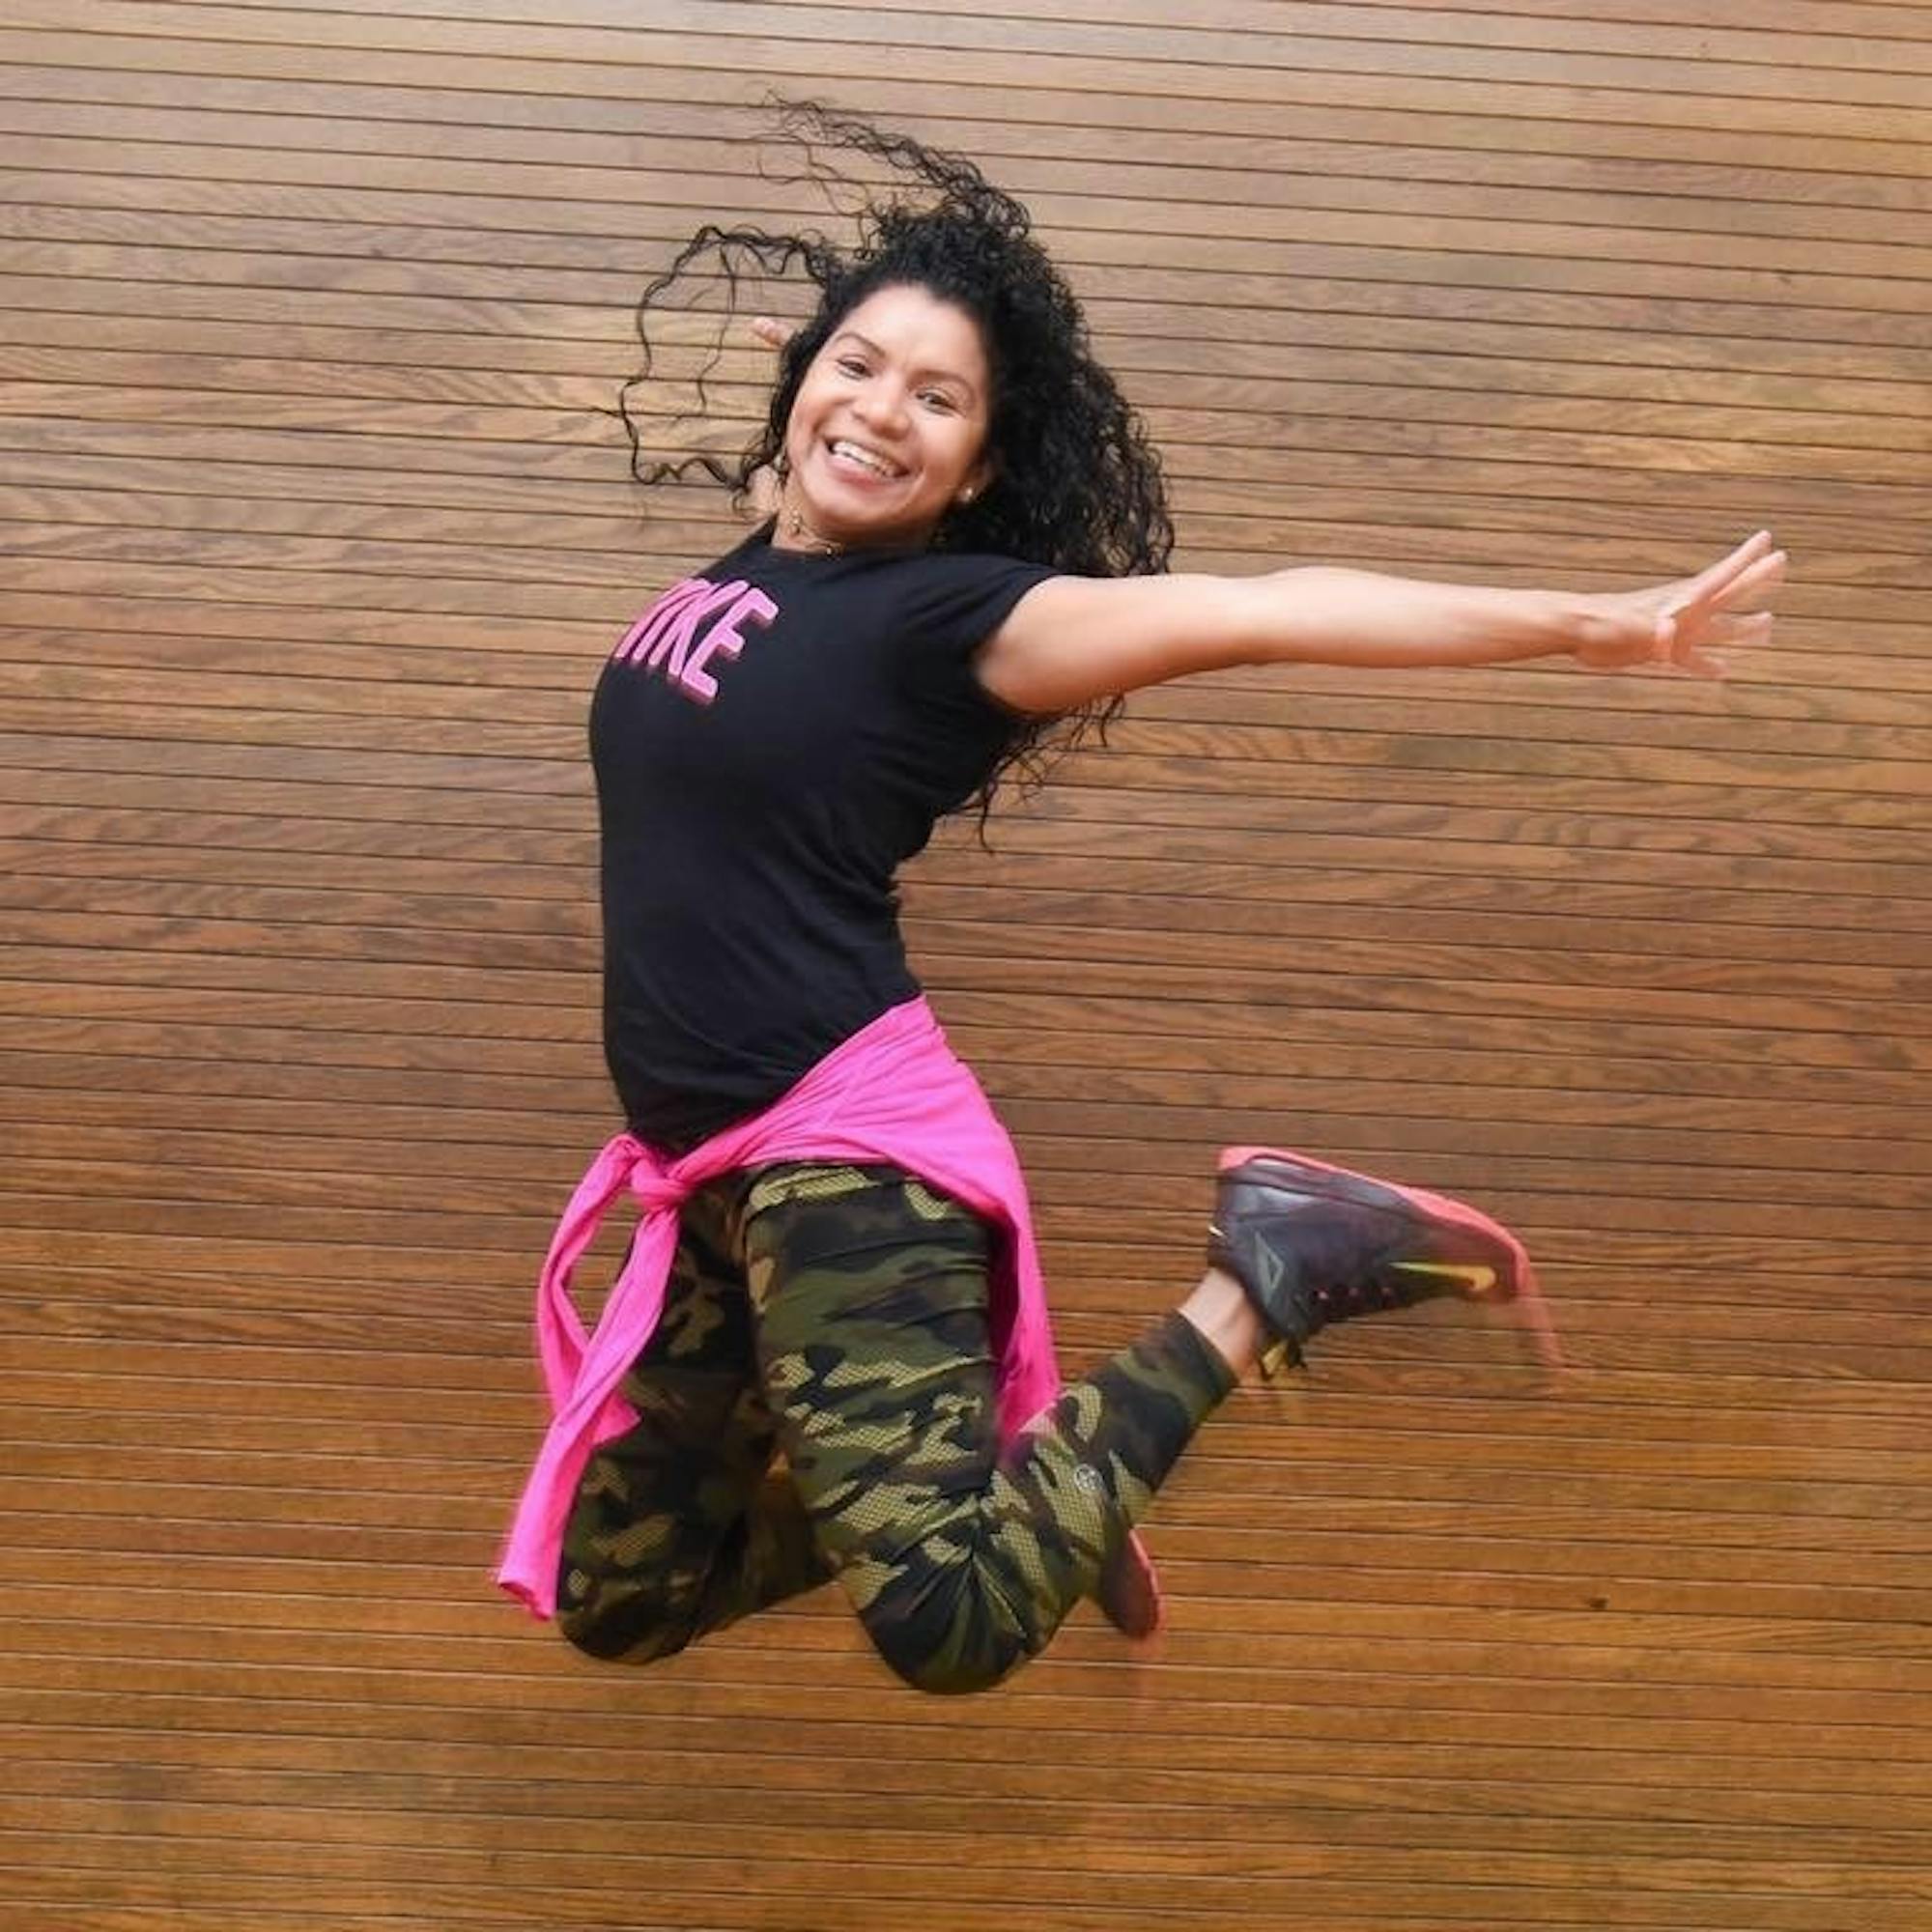 Certified instructor Evelyn Thibodeau teaches Zumba at the College.